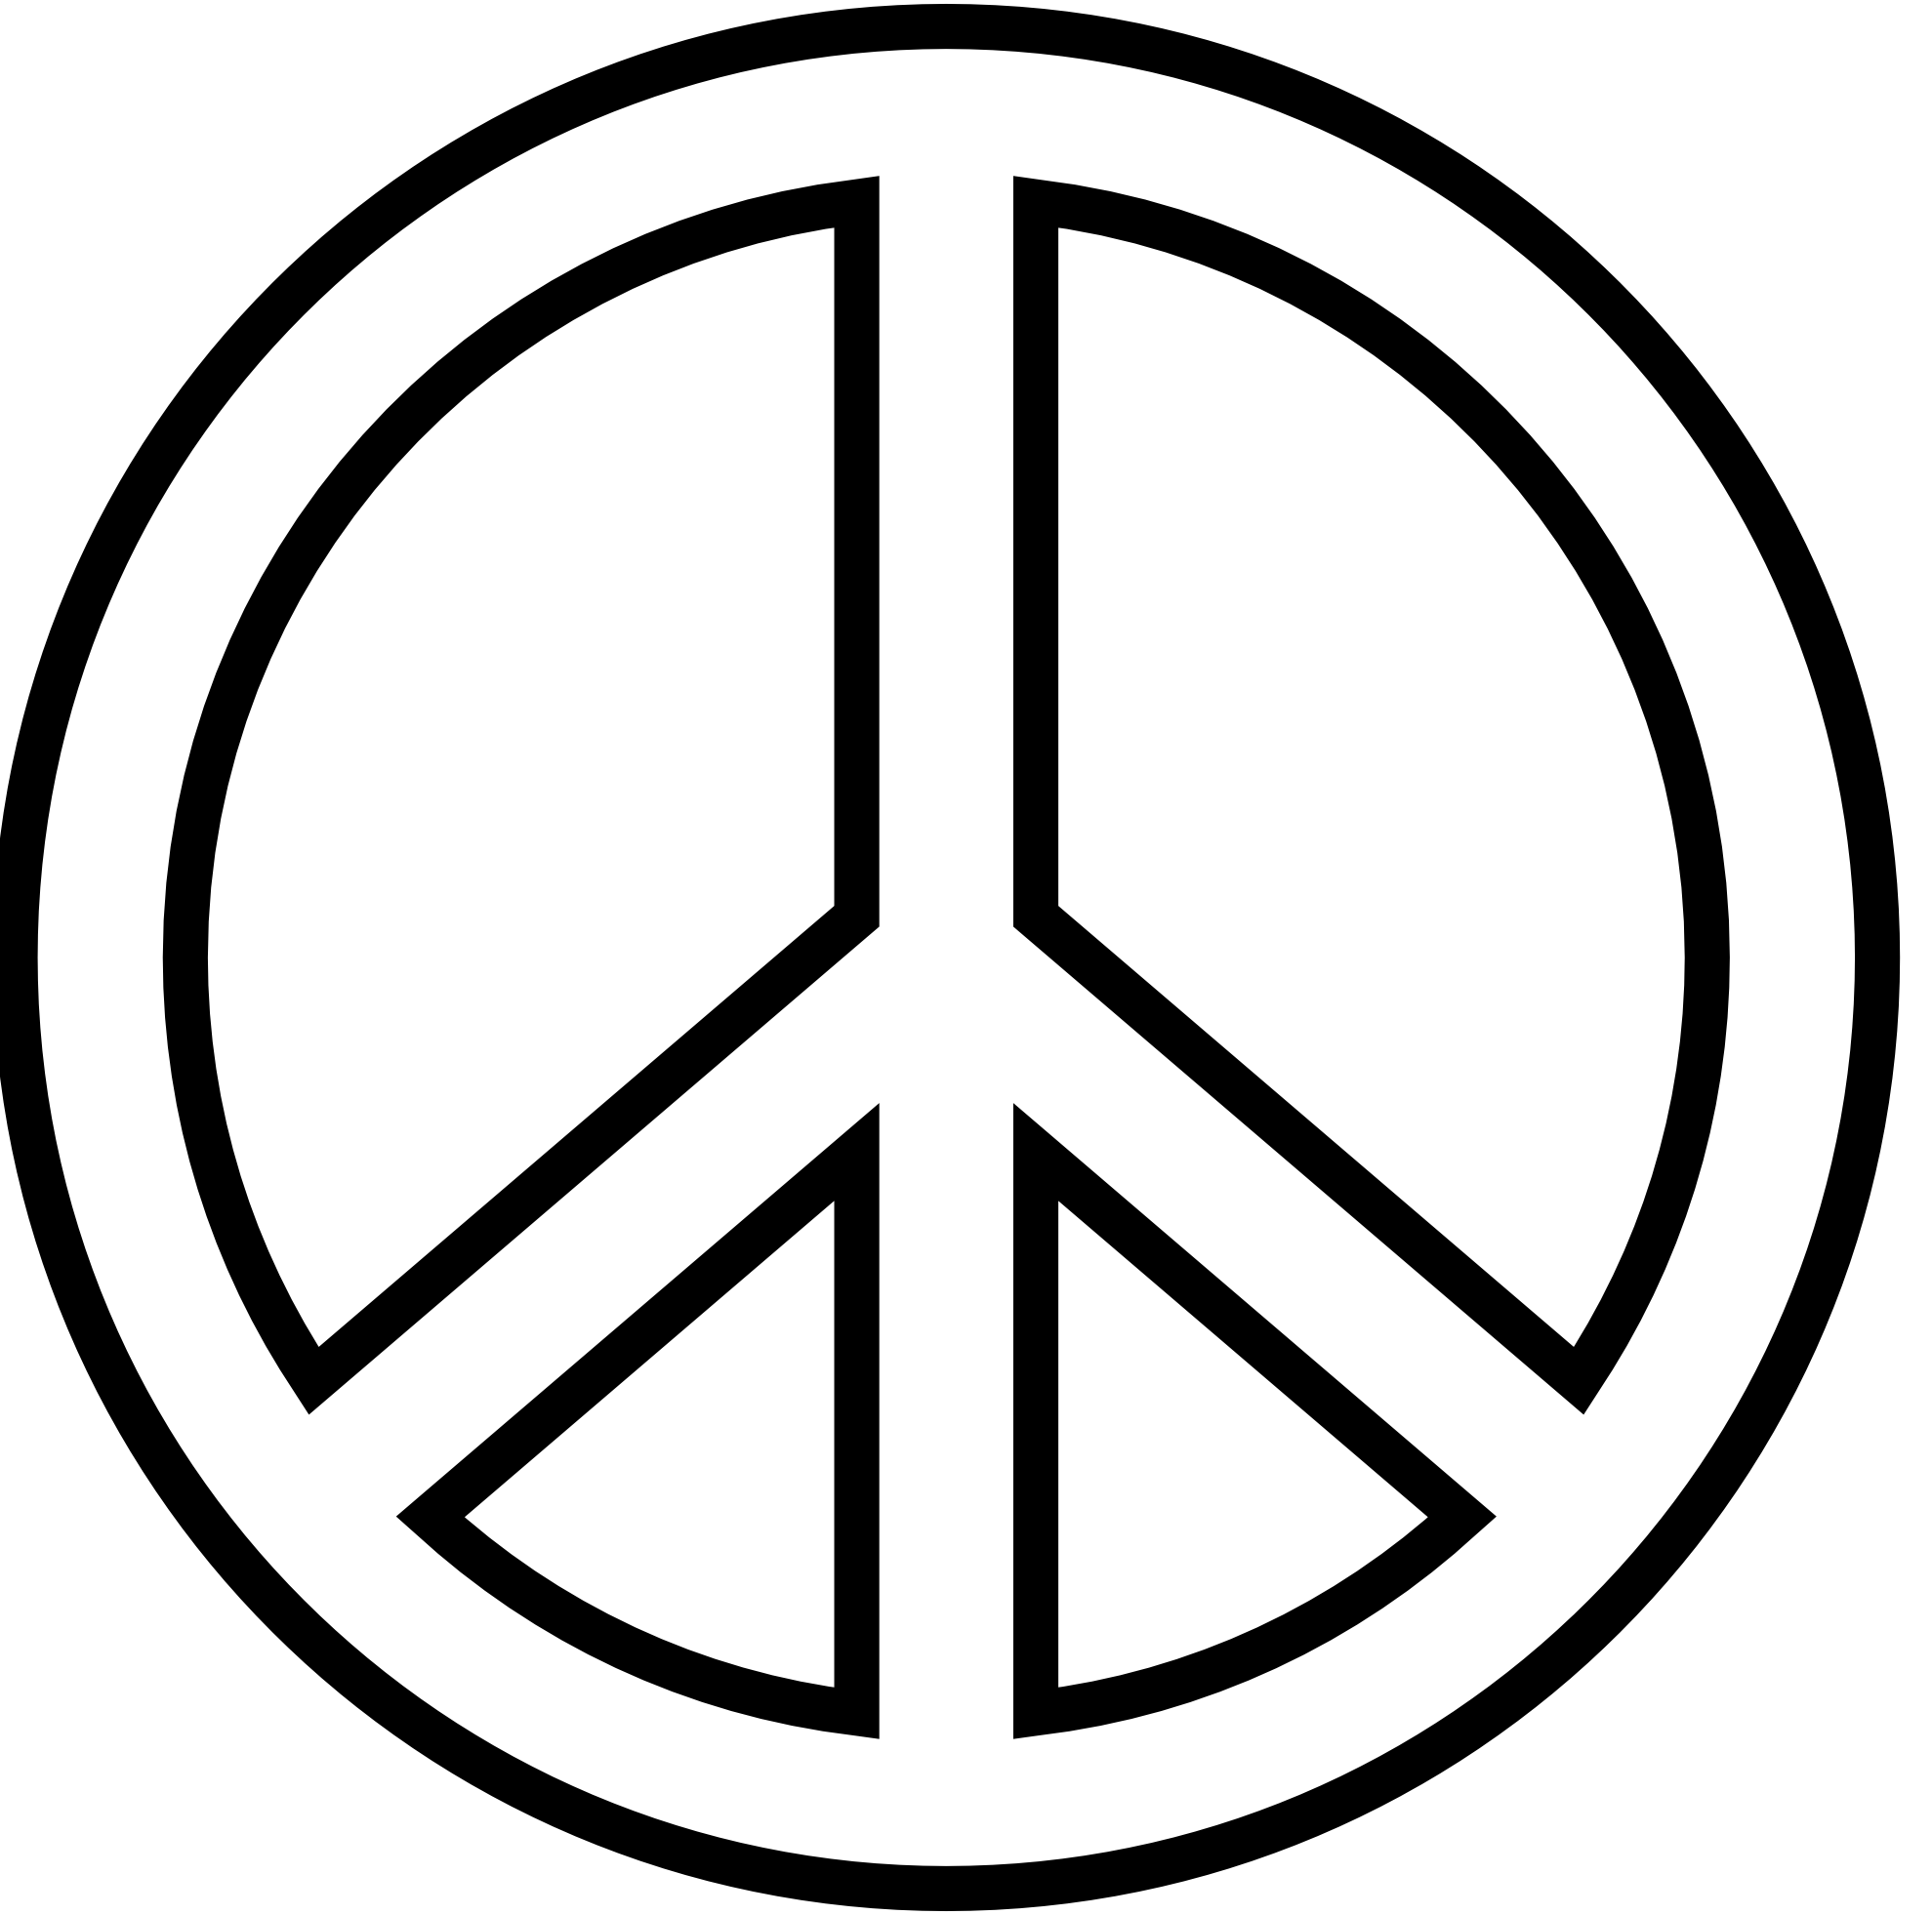 Peace sign images free clip a - Peace Sign Images Free Clip Art